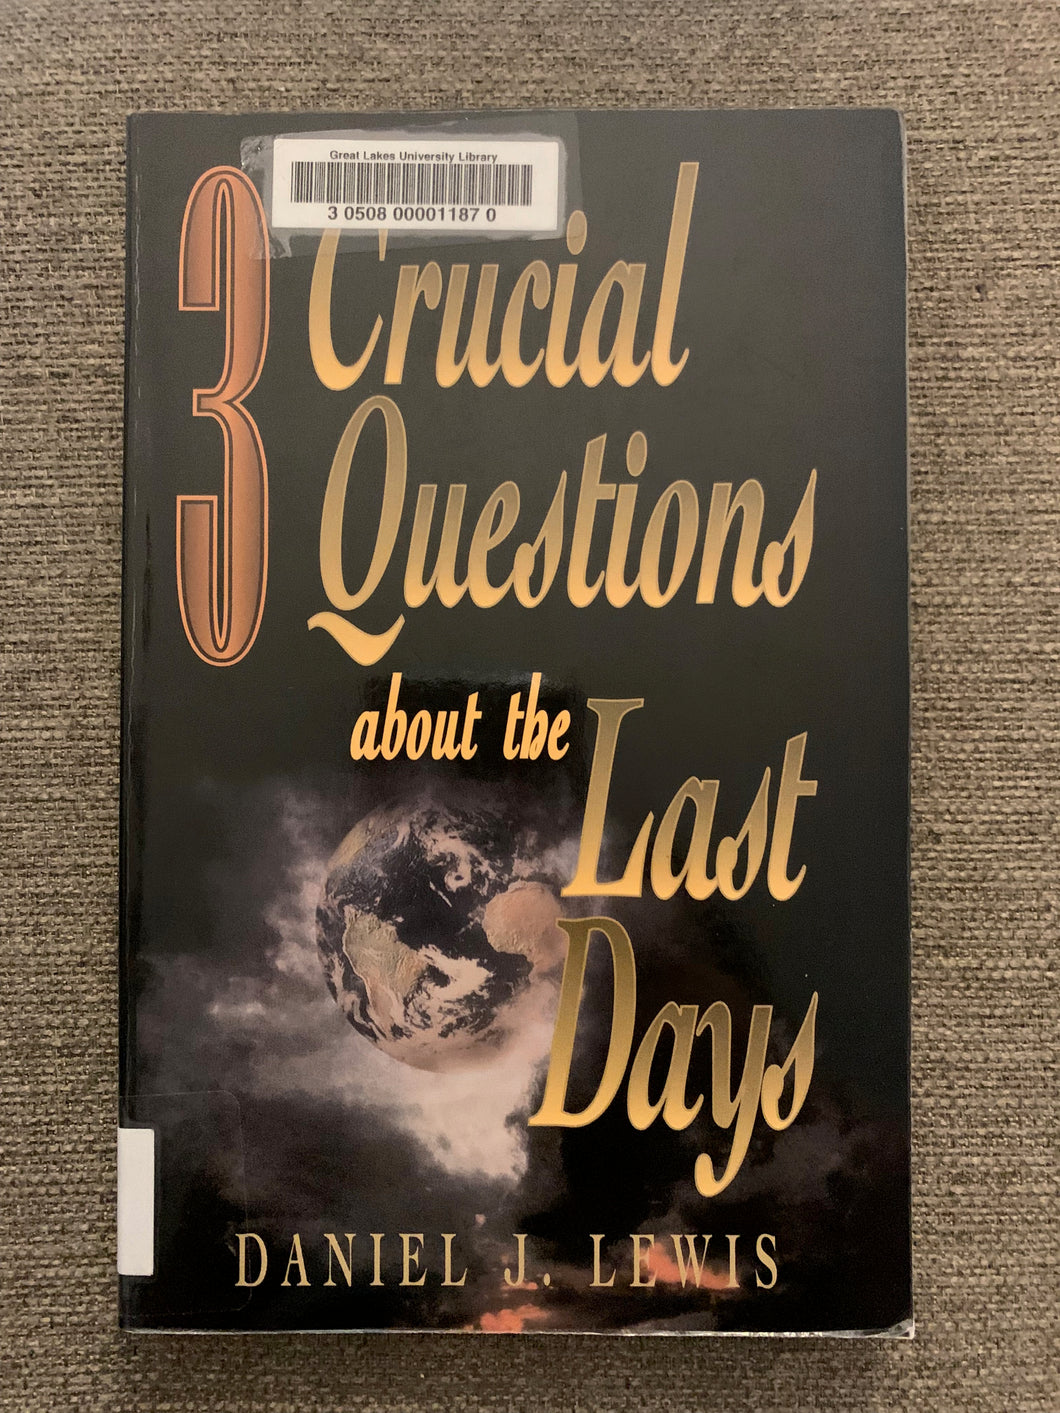 3 Crucial Questions about the Last Days by Daniel J. Lewis